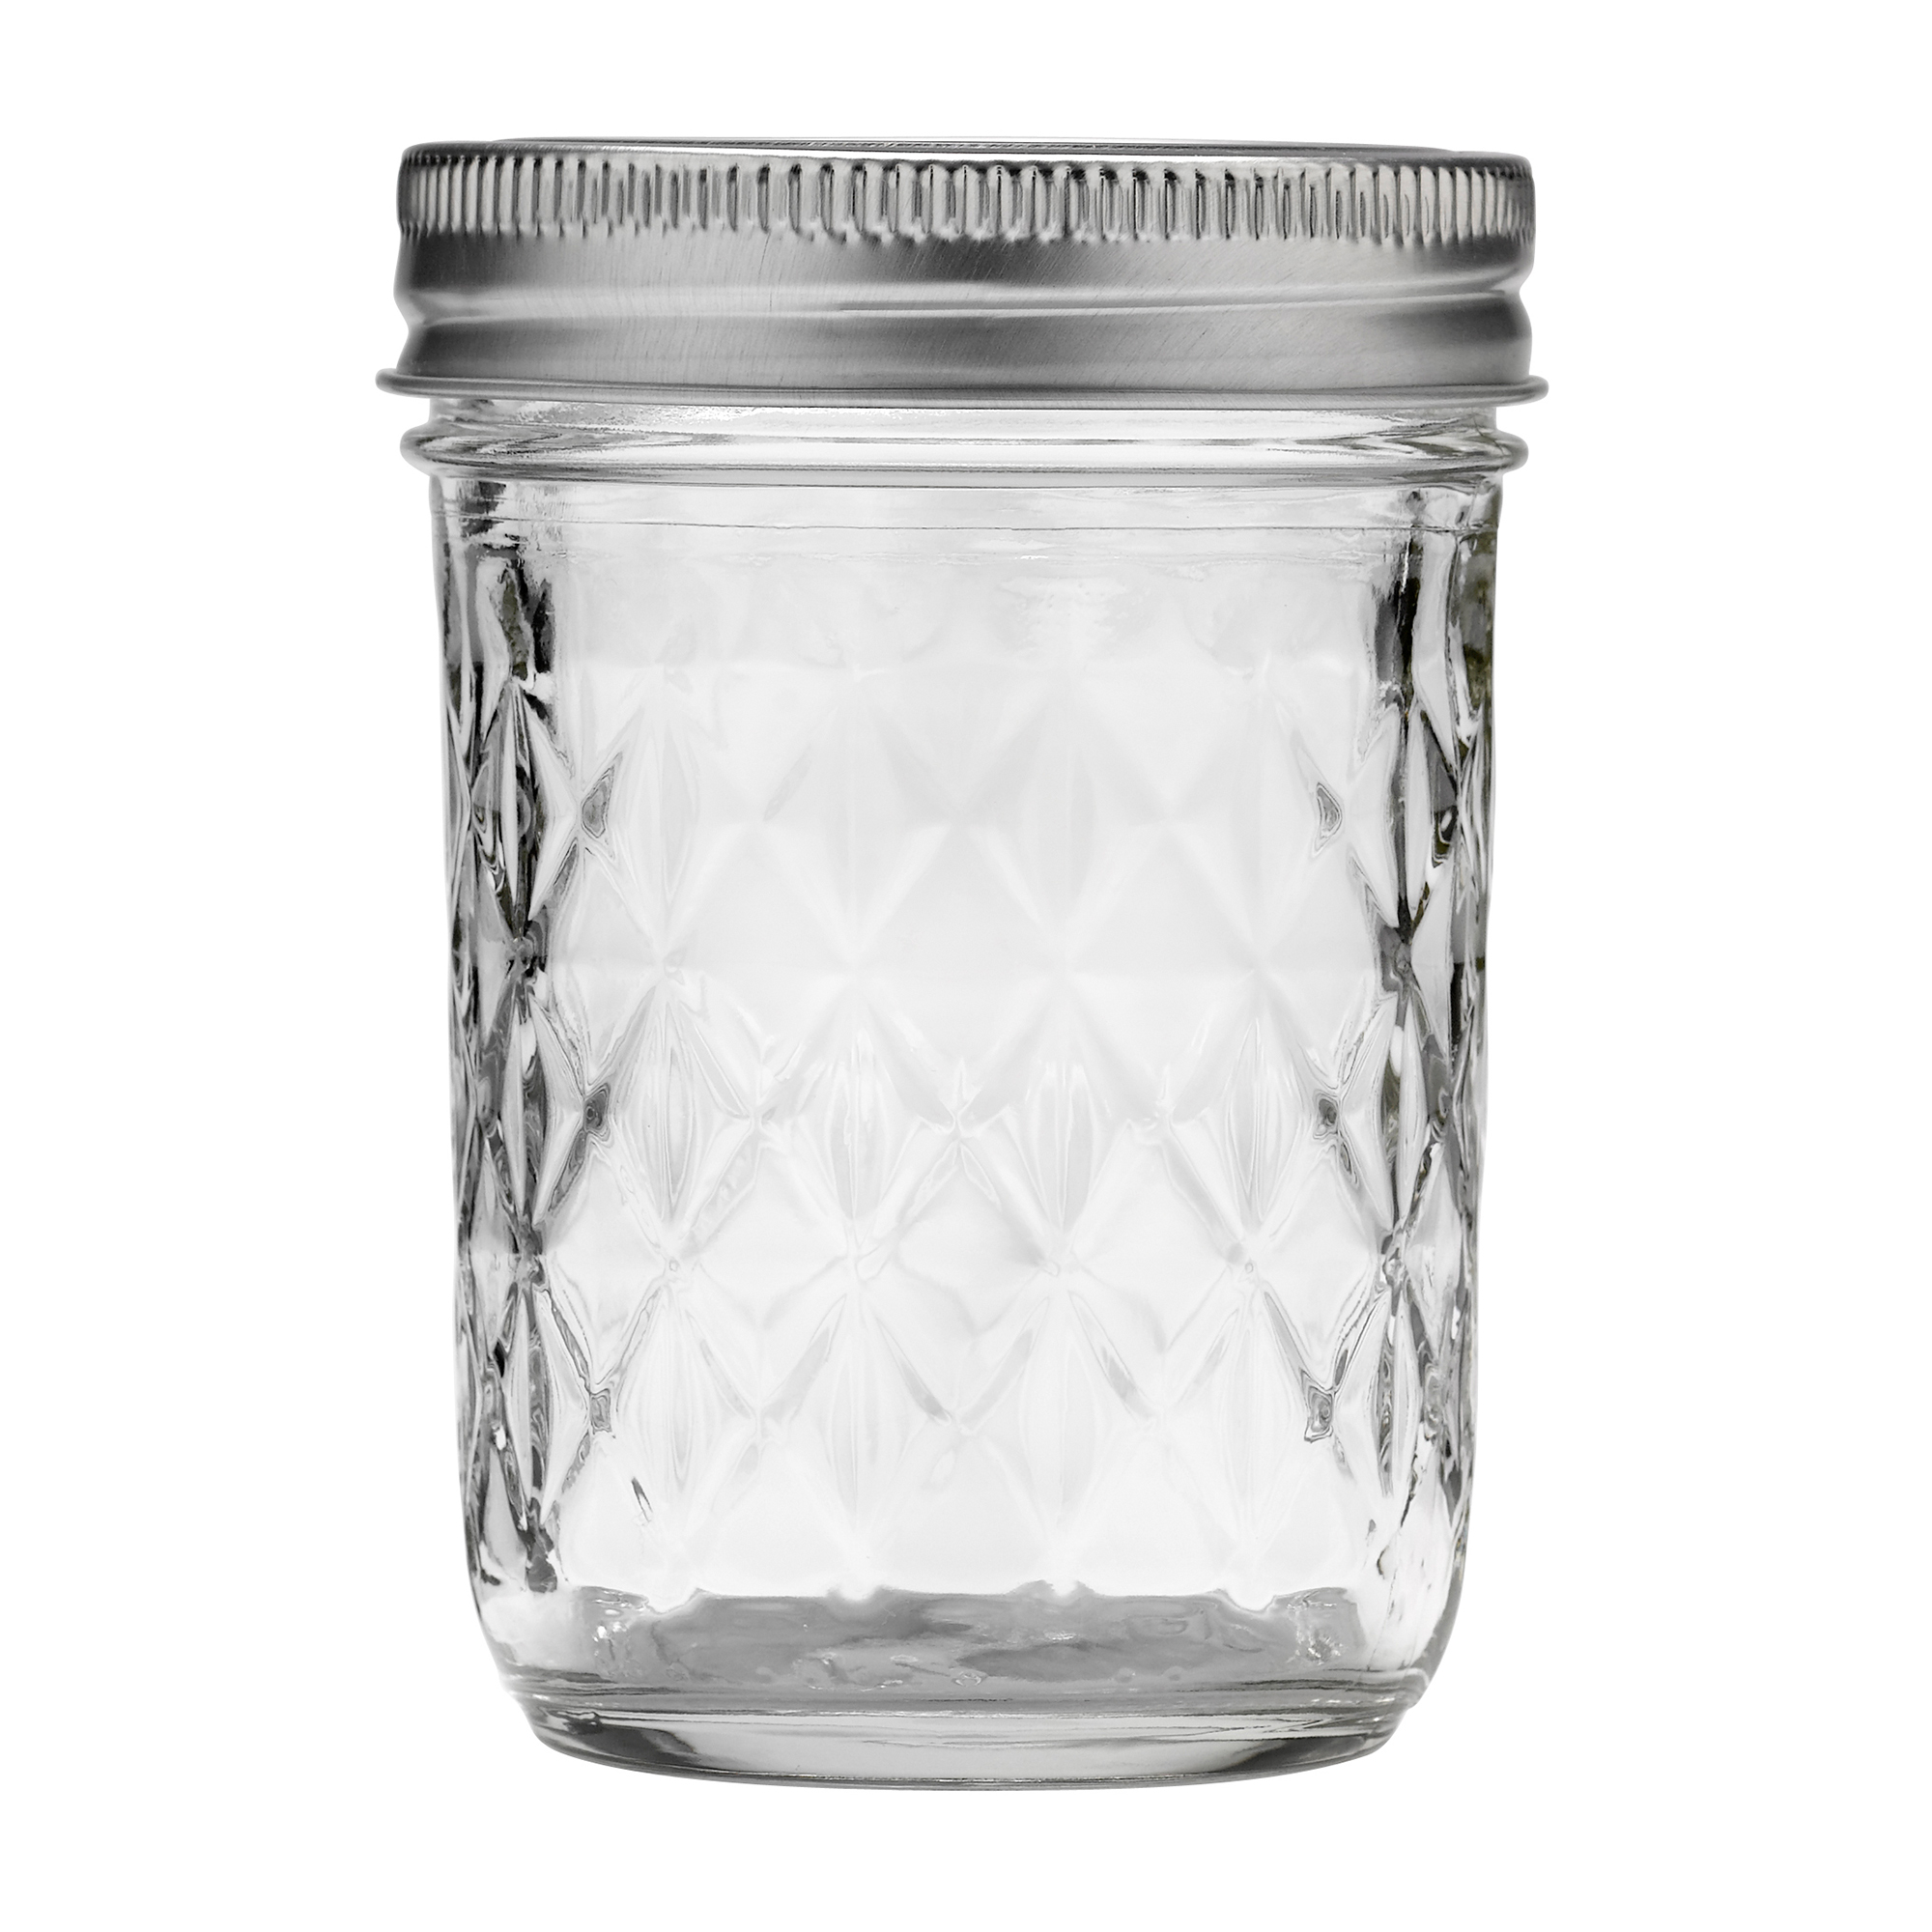 Ball Quilted Crystal Mason Jar w/ Lid & Band, Regular Mouth, 8 Ounces, 12 Count, 4 Lb. - image 1 of 8